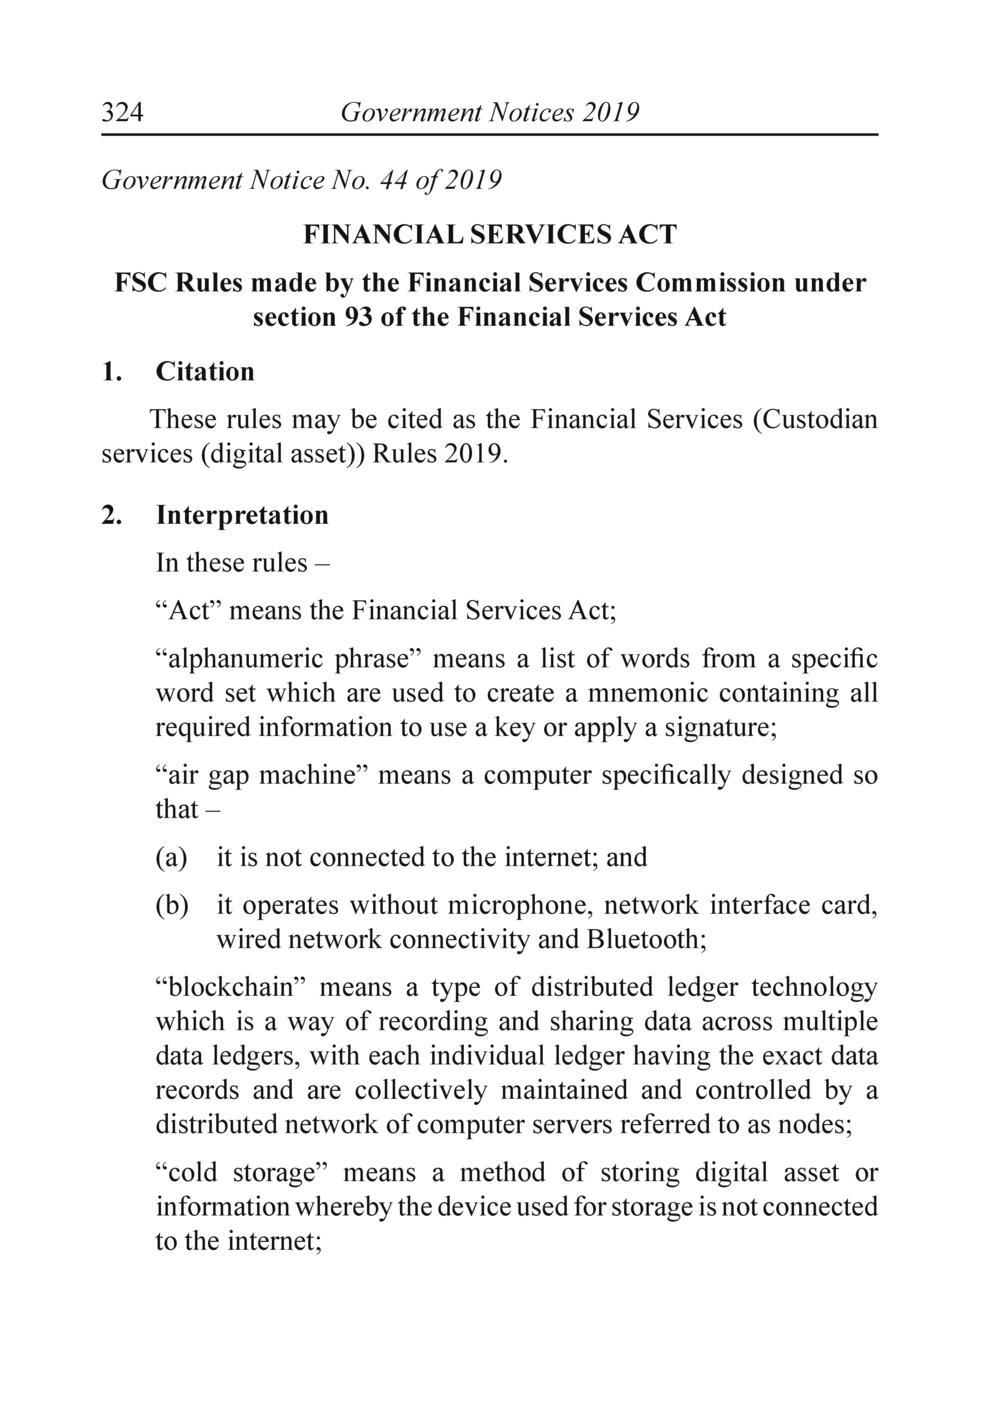 FSC Rules made by the Financial Services Commission under section 93 of the Financial Services Act